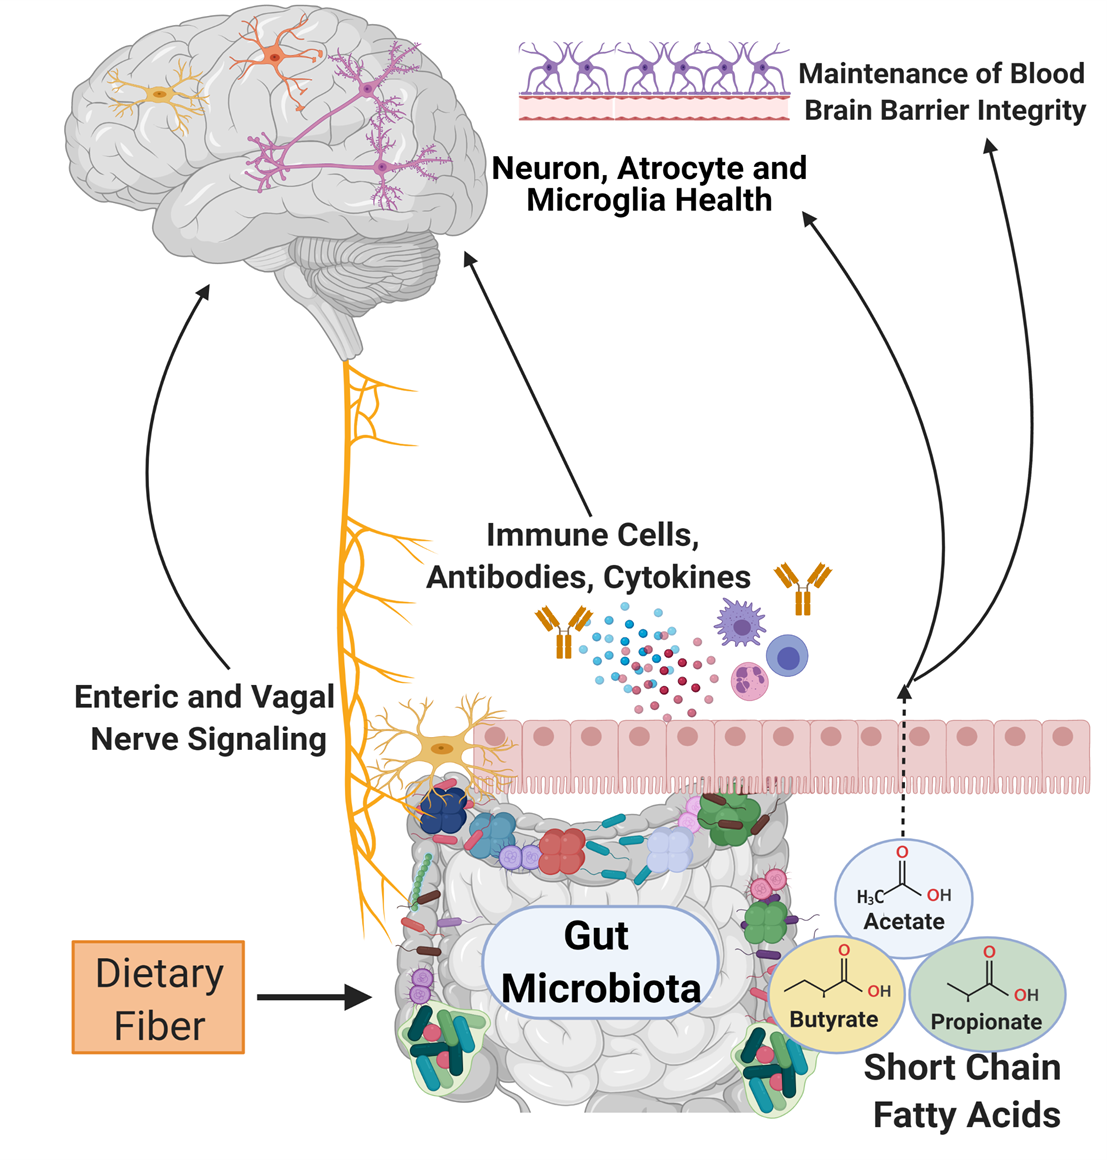 Overview of the Microbiome and the Gut-Brain Axis